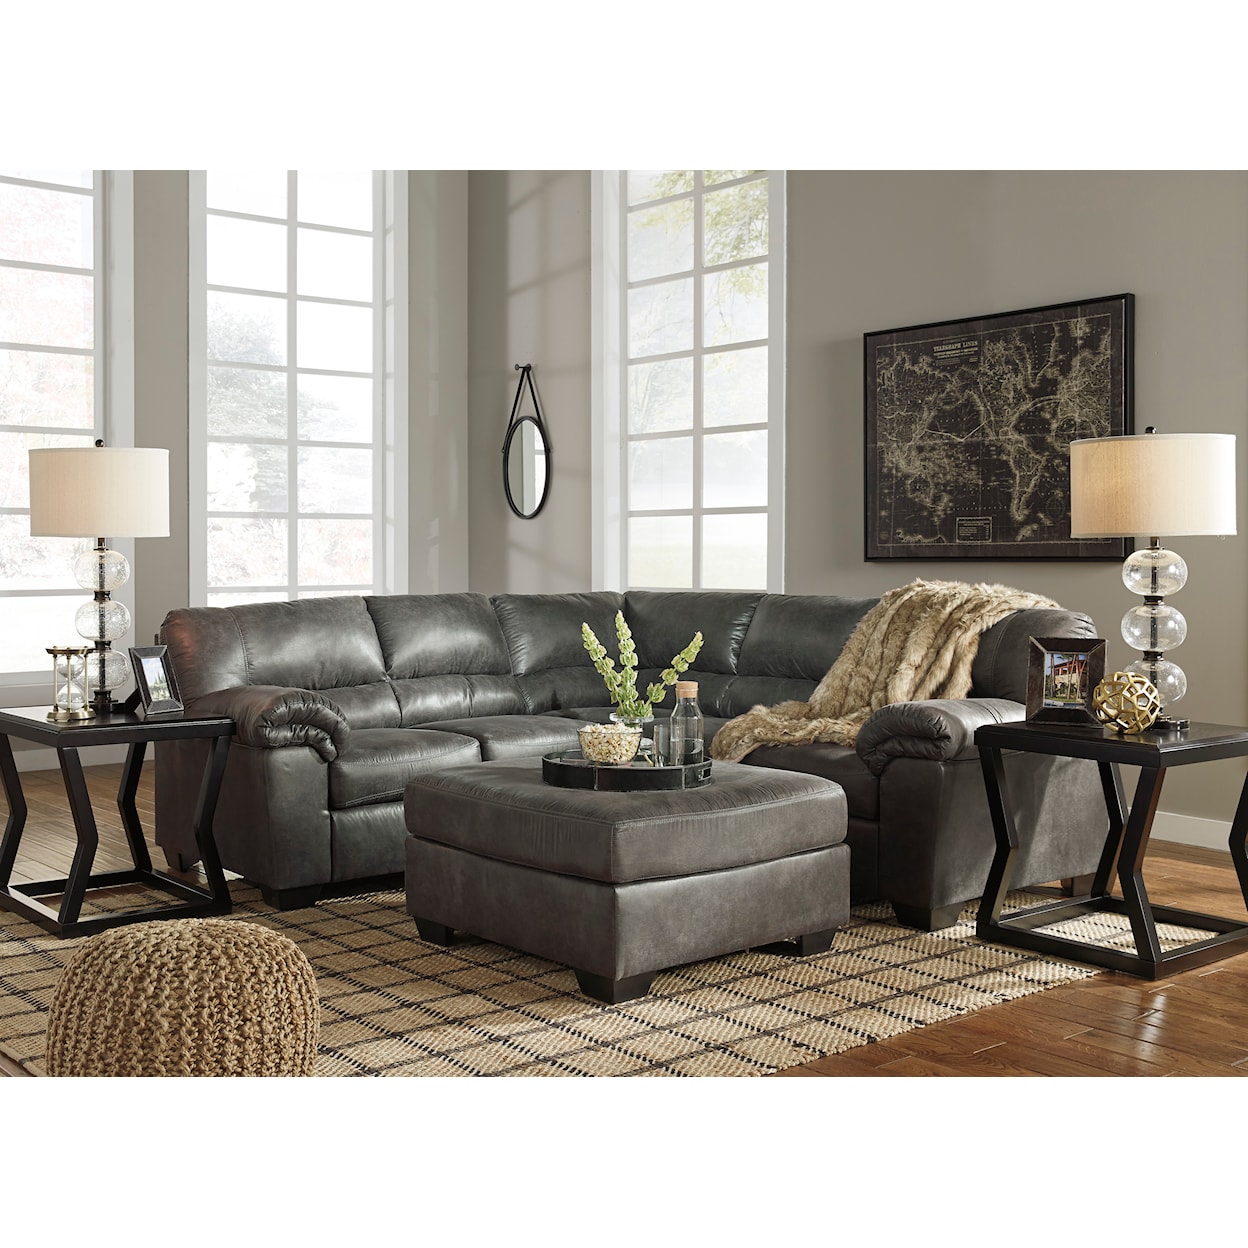 Michael Alan Select Bladen 2-Piece Sectional with Ottoman